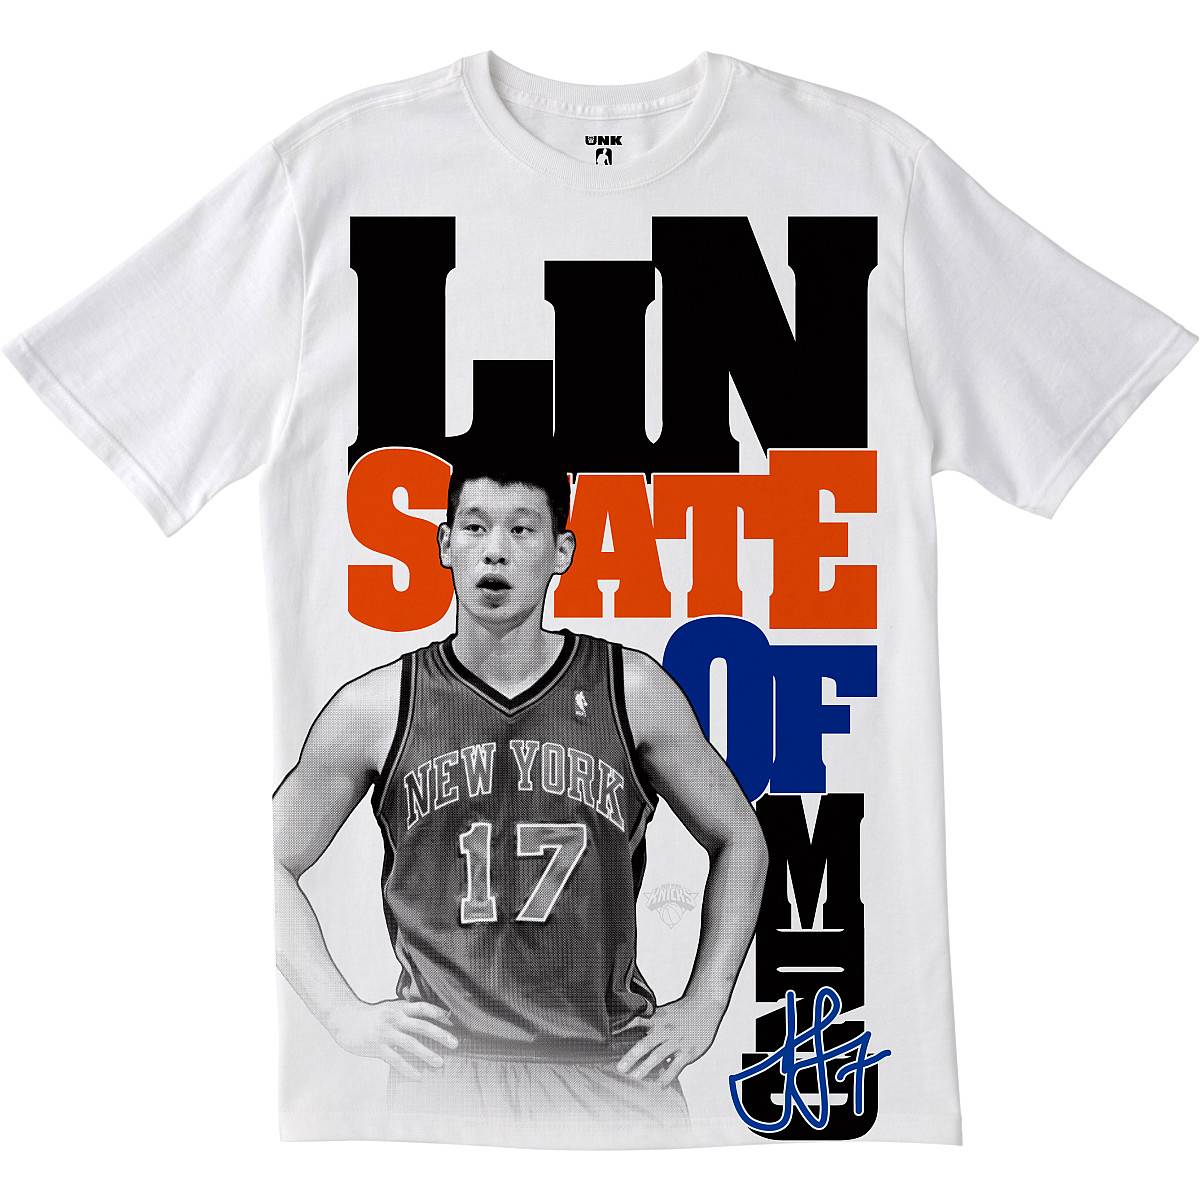 In latest sign of national Linsanity, Spike Lee dons Lin's actual high  school jersey